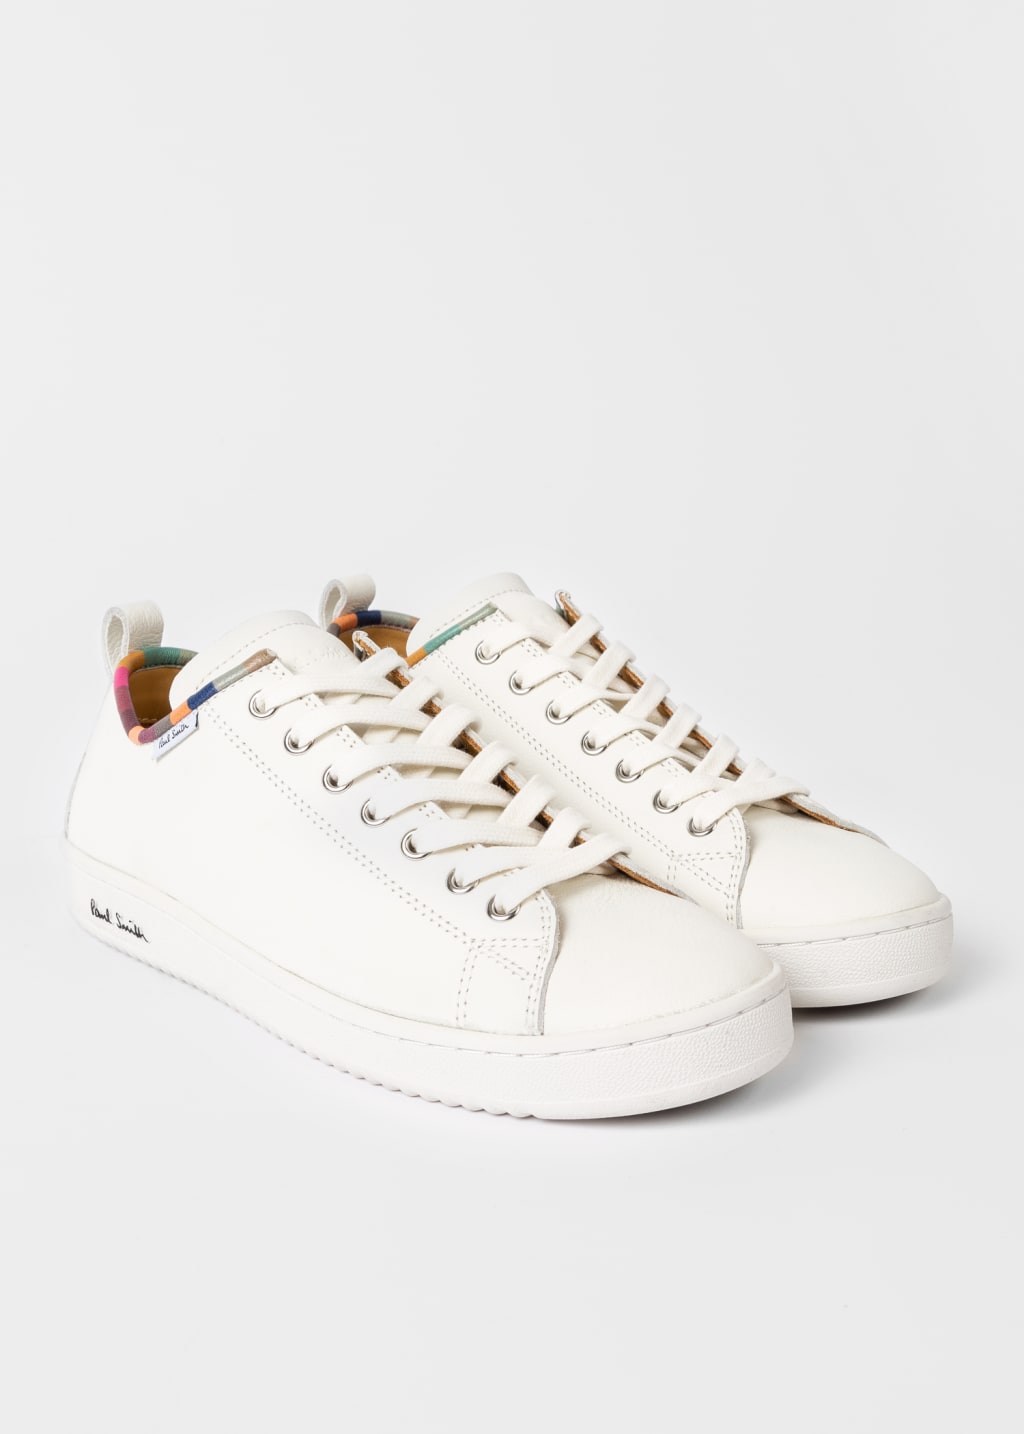 Product View - Women's White Leather 'Miyata' Trainers with 'Swirl' Trim by Paul Smith